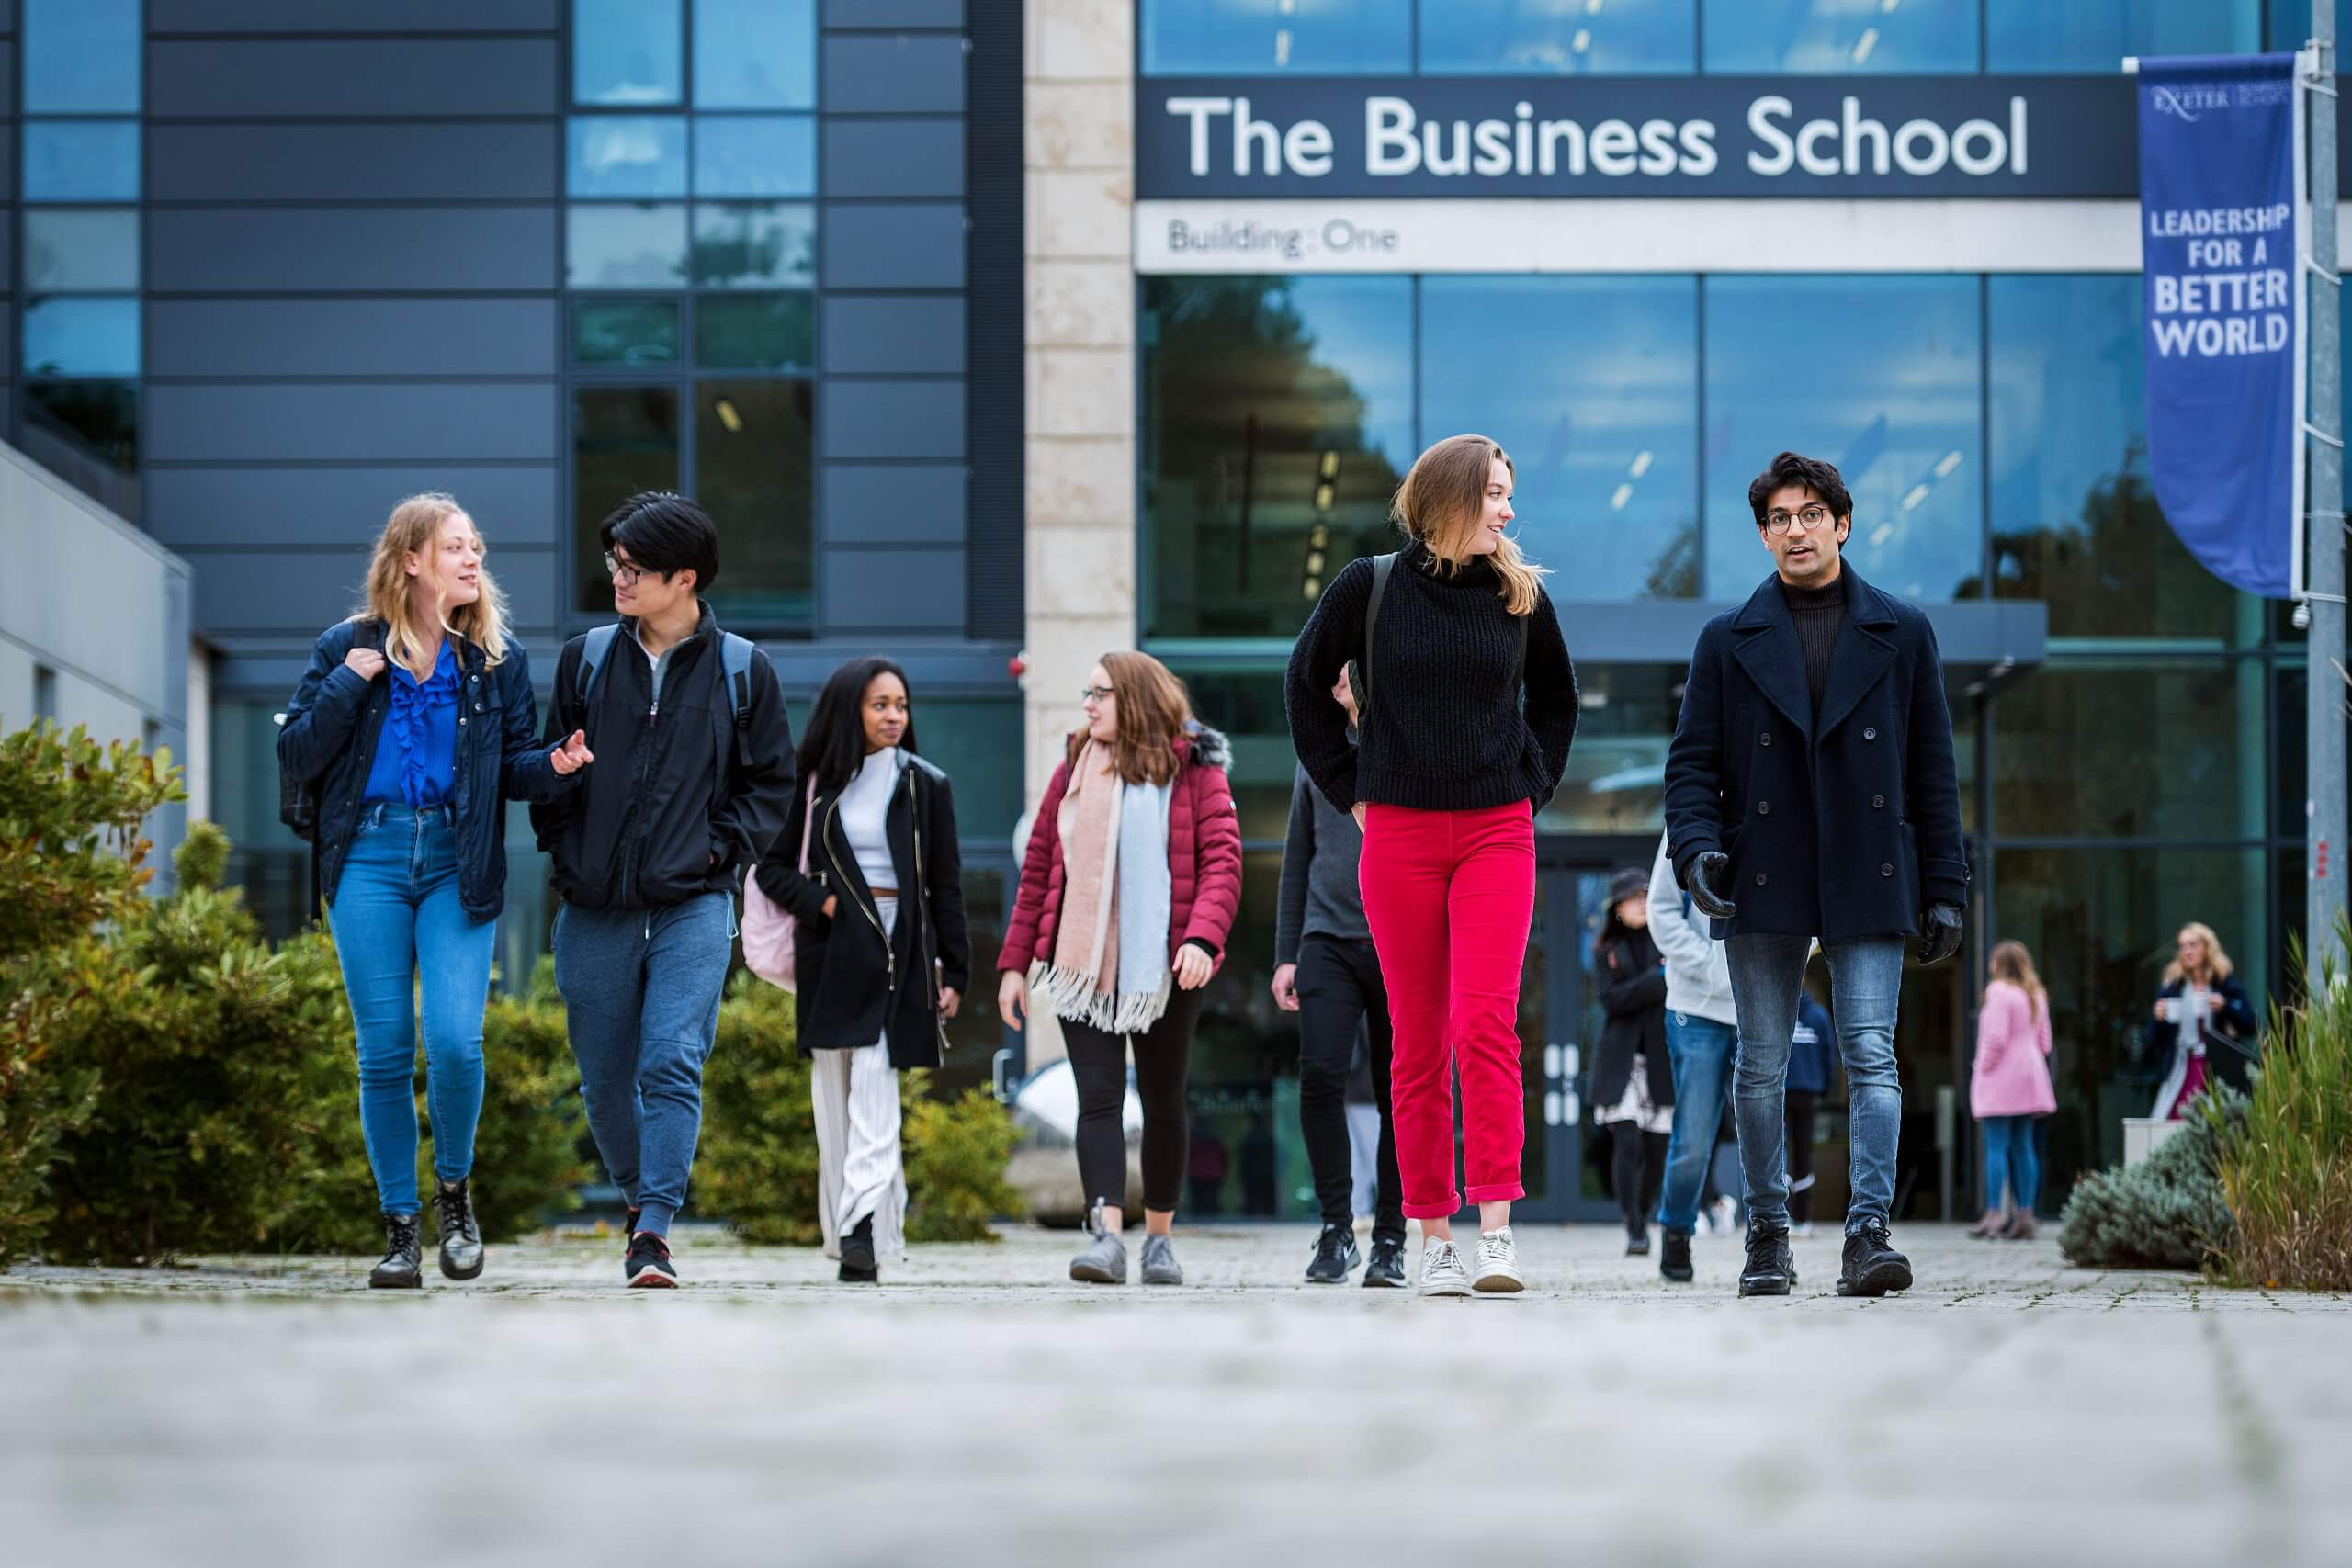 University of Exeter: A sustainable business school for the future